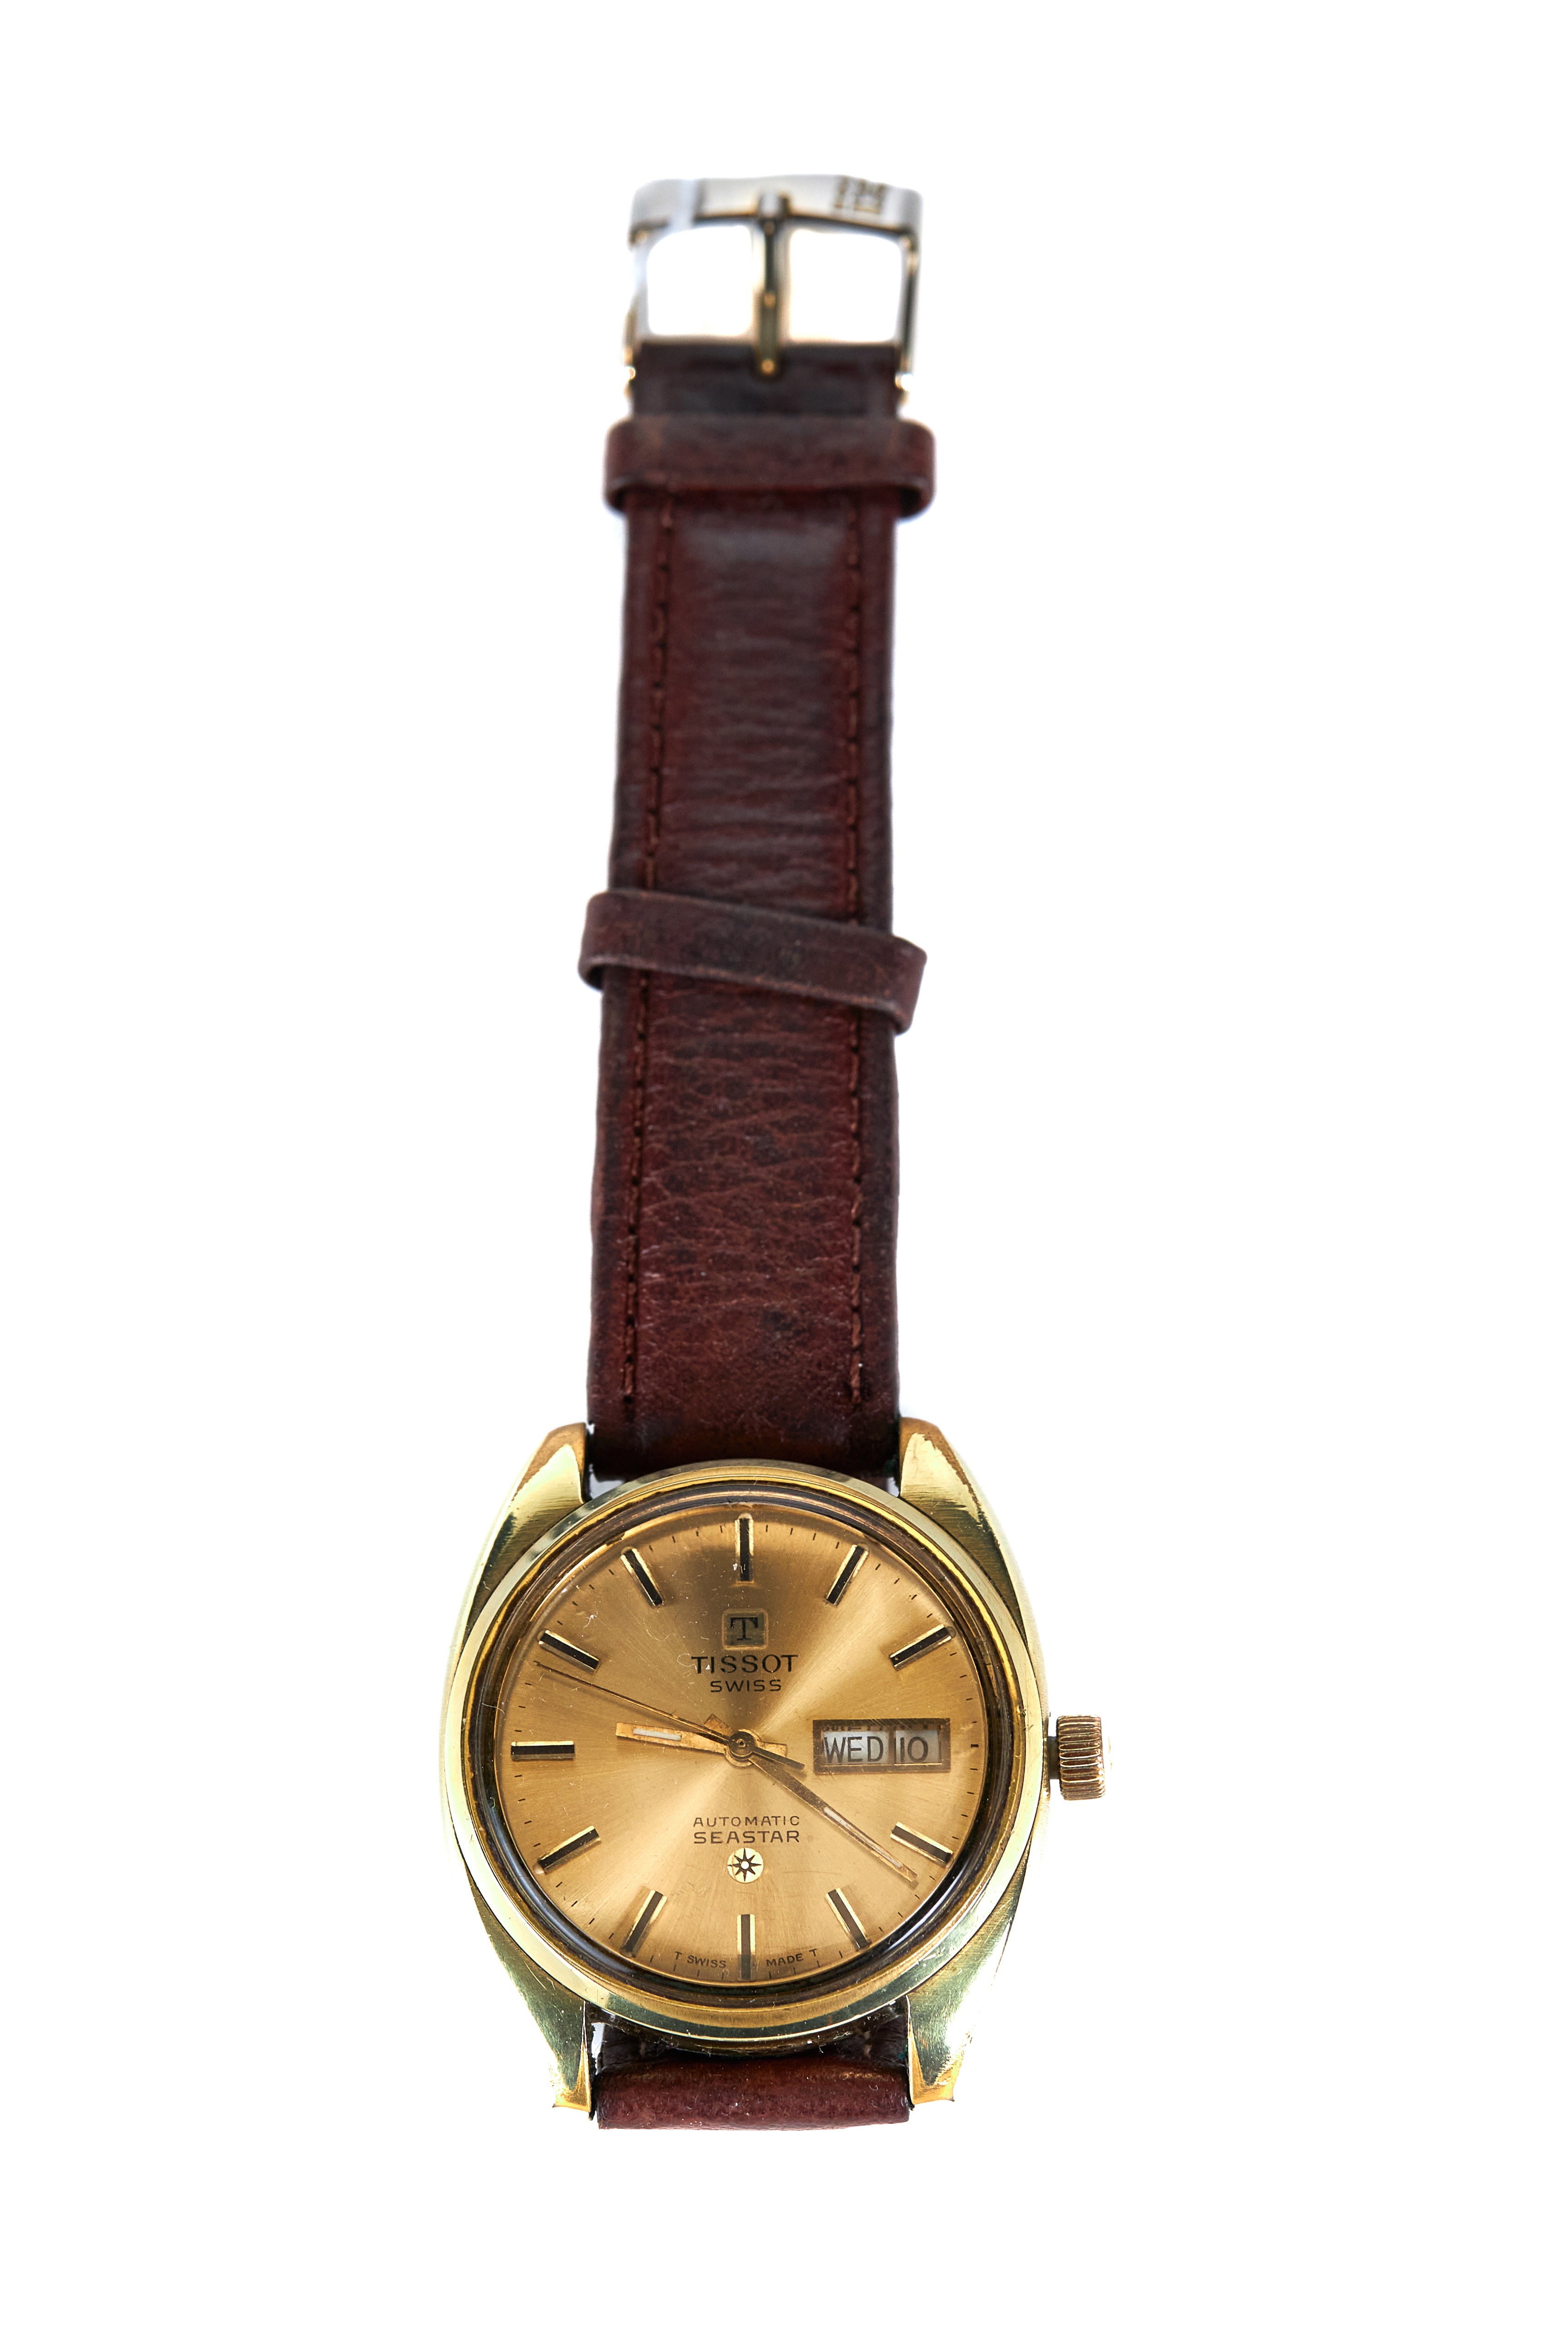 A GENTS TISSOT SEASTAR AUTOMATIC GOLD PLATED WRIST WATCH, champagne dial with day/date,